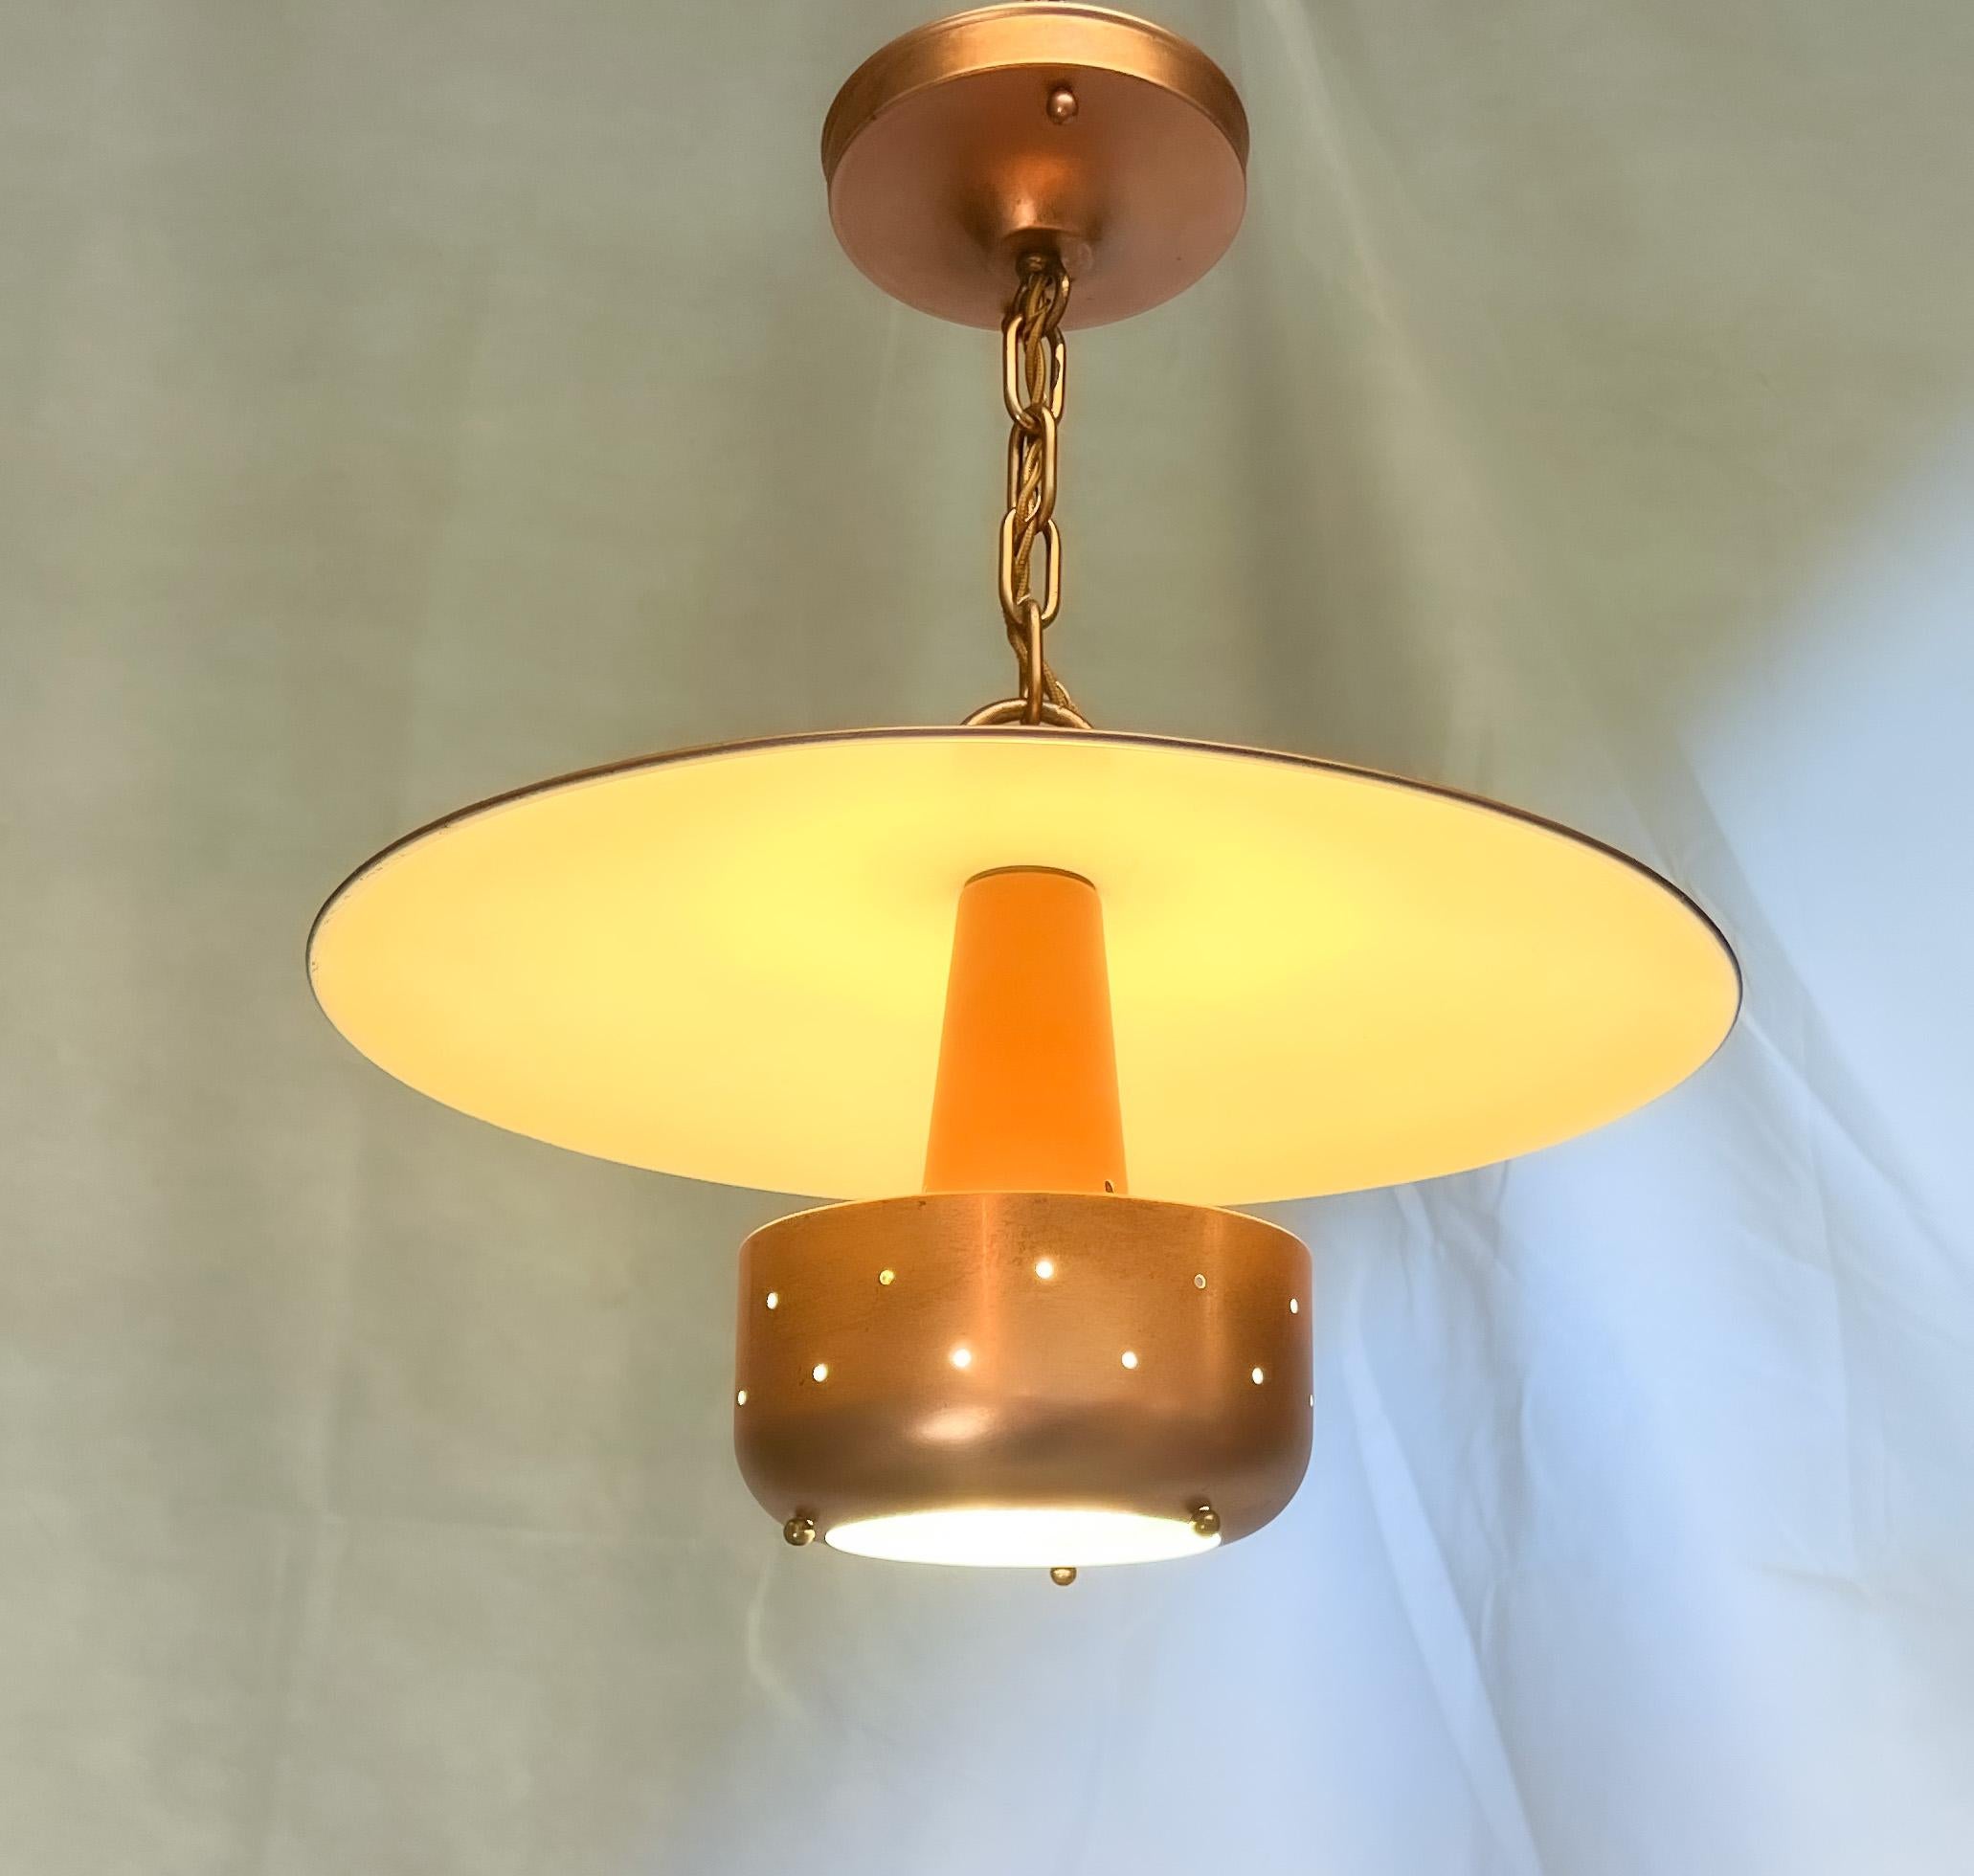 Love these two.
Hero picture is a tad misleading in that the underside of the saucer appears yellow, it is white. It shows that way because it is on/ lit up.
Light is copper painted over brass and steel elements. The fixture is old, but all wiring